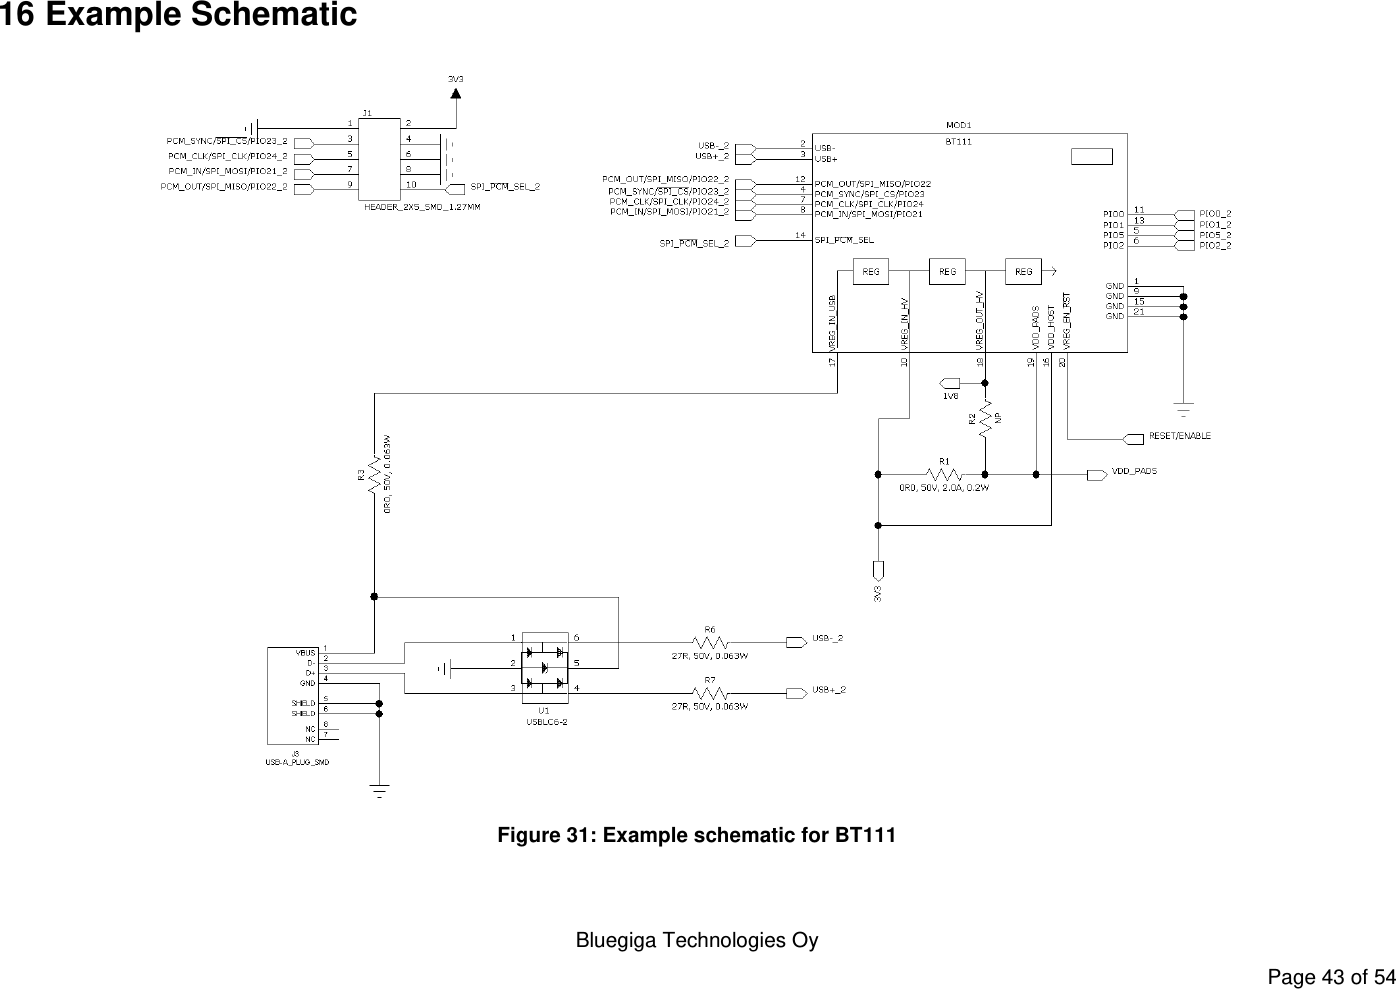    Bluegiga Technologies Oy Page 43 of 54 16 Example Schematic  Figure 31: Example schematic for BT111